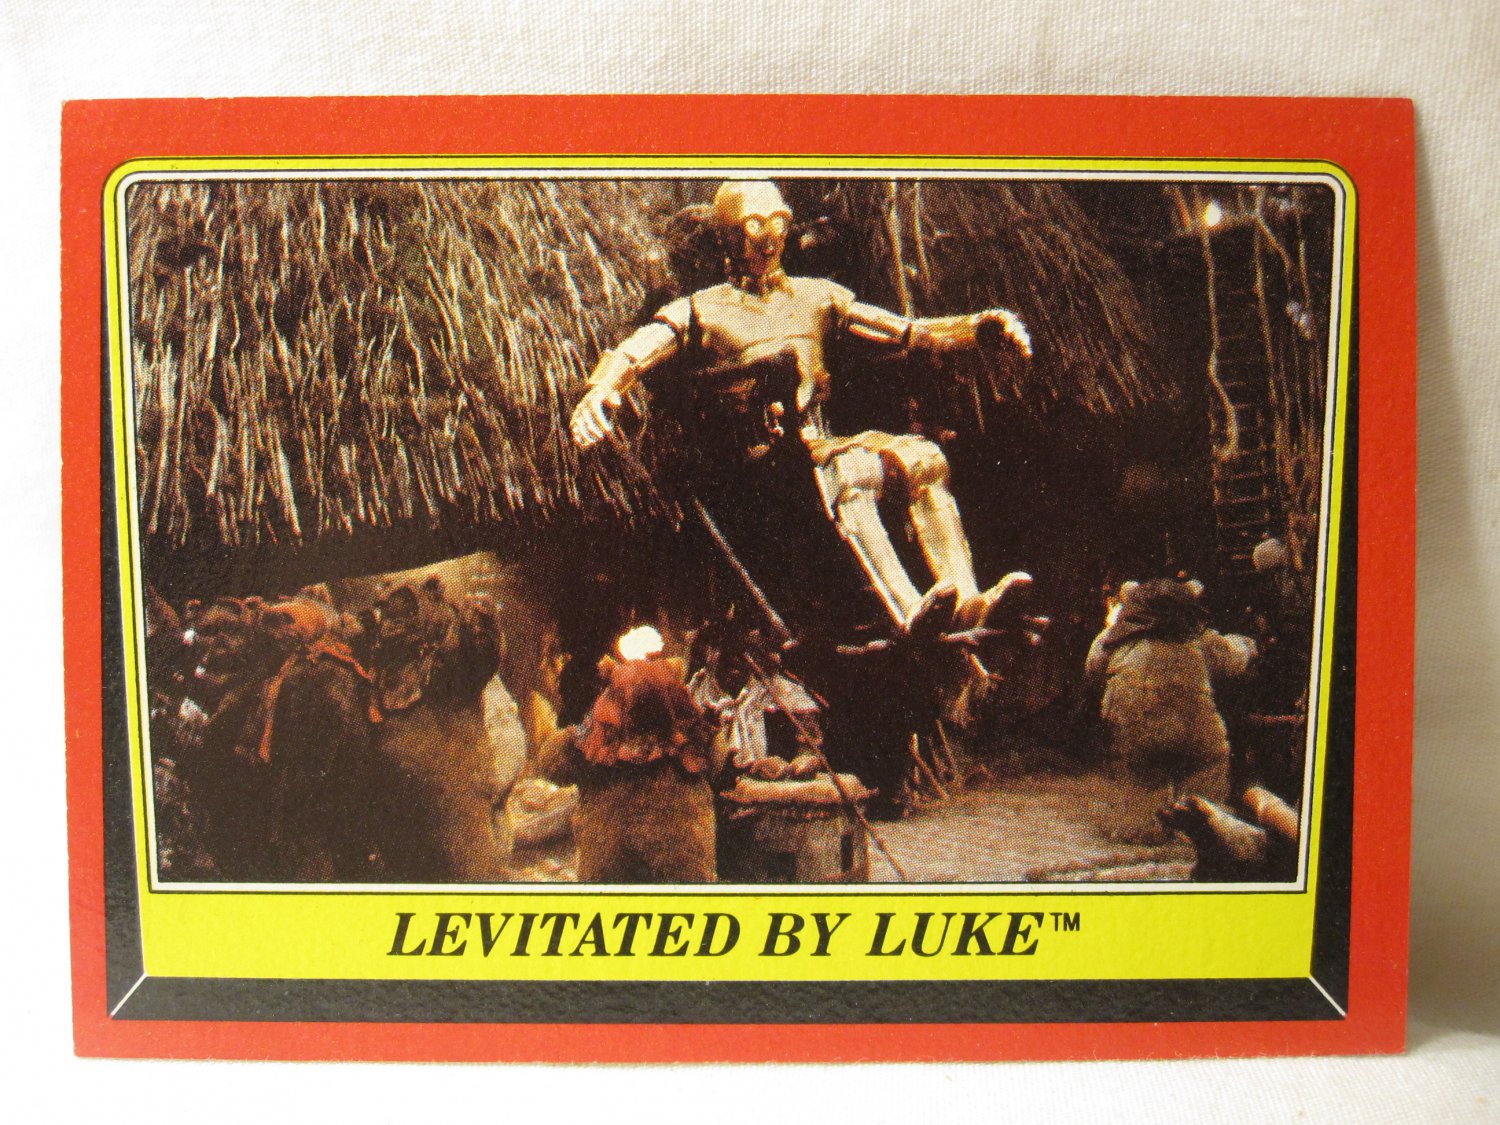 1983 Star Wars - Return of the Jedi Trading Card #83: Levitated by Luke